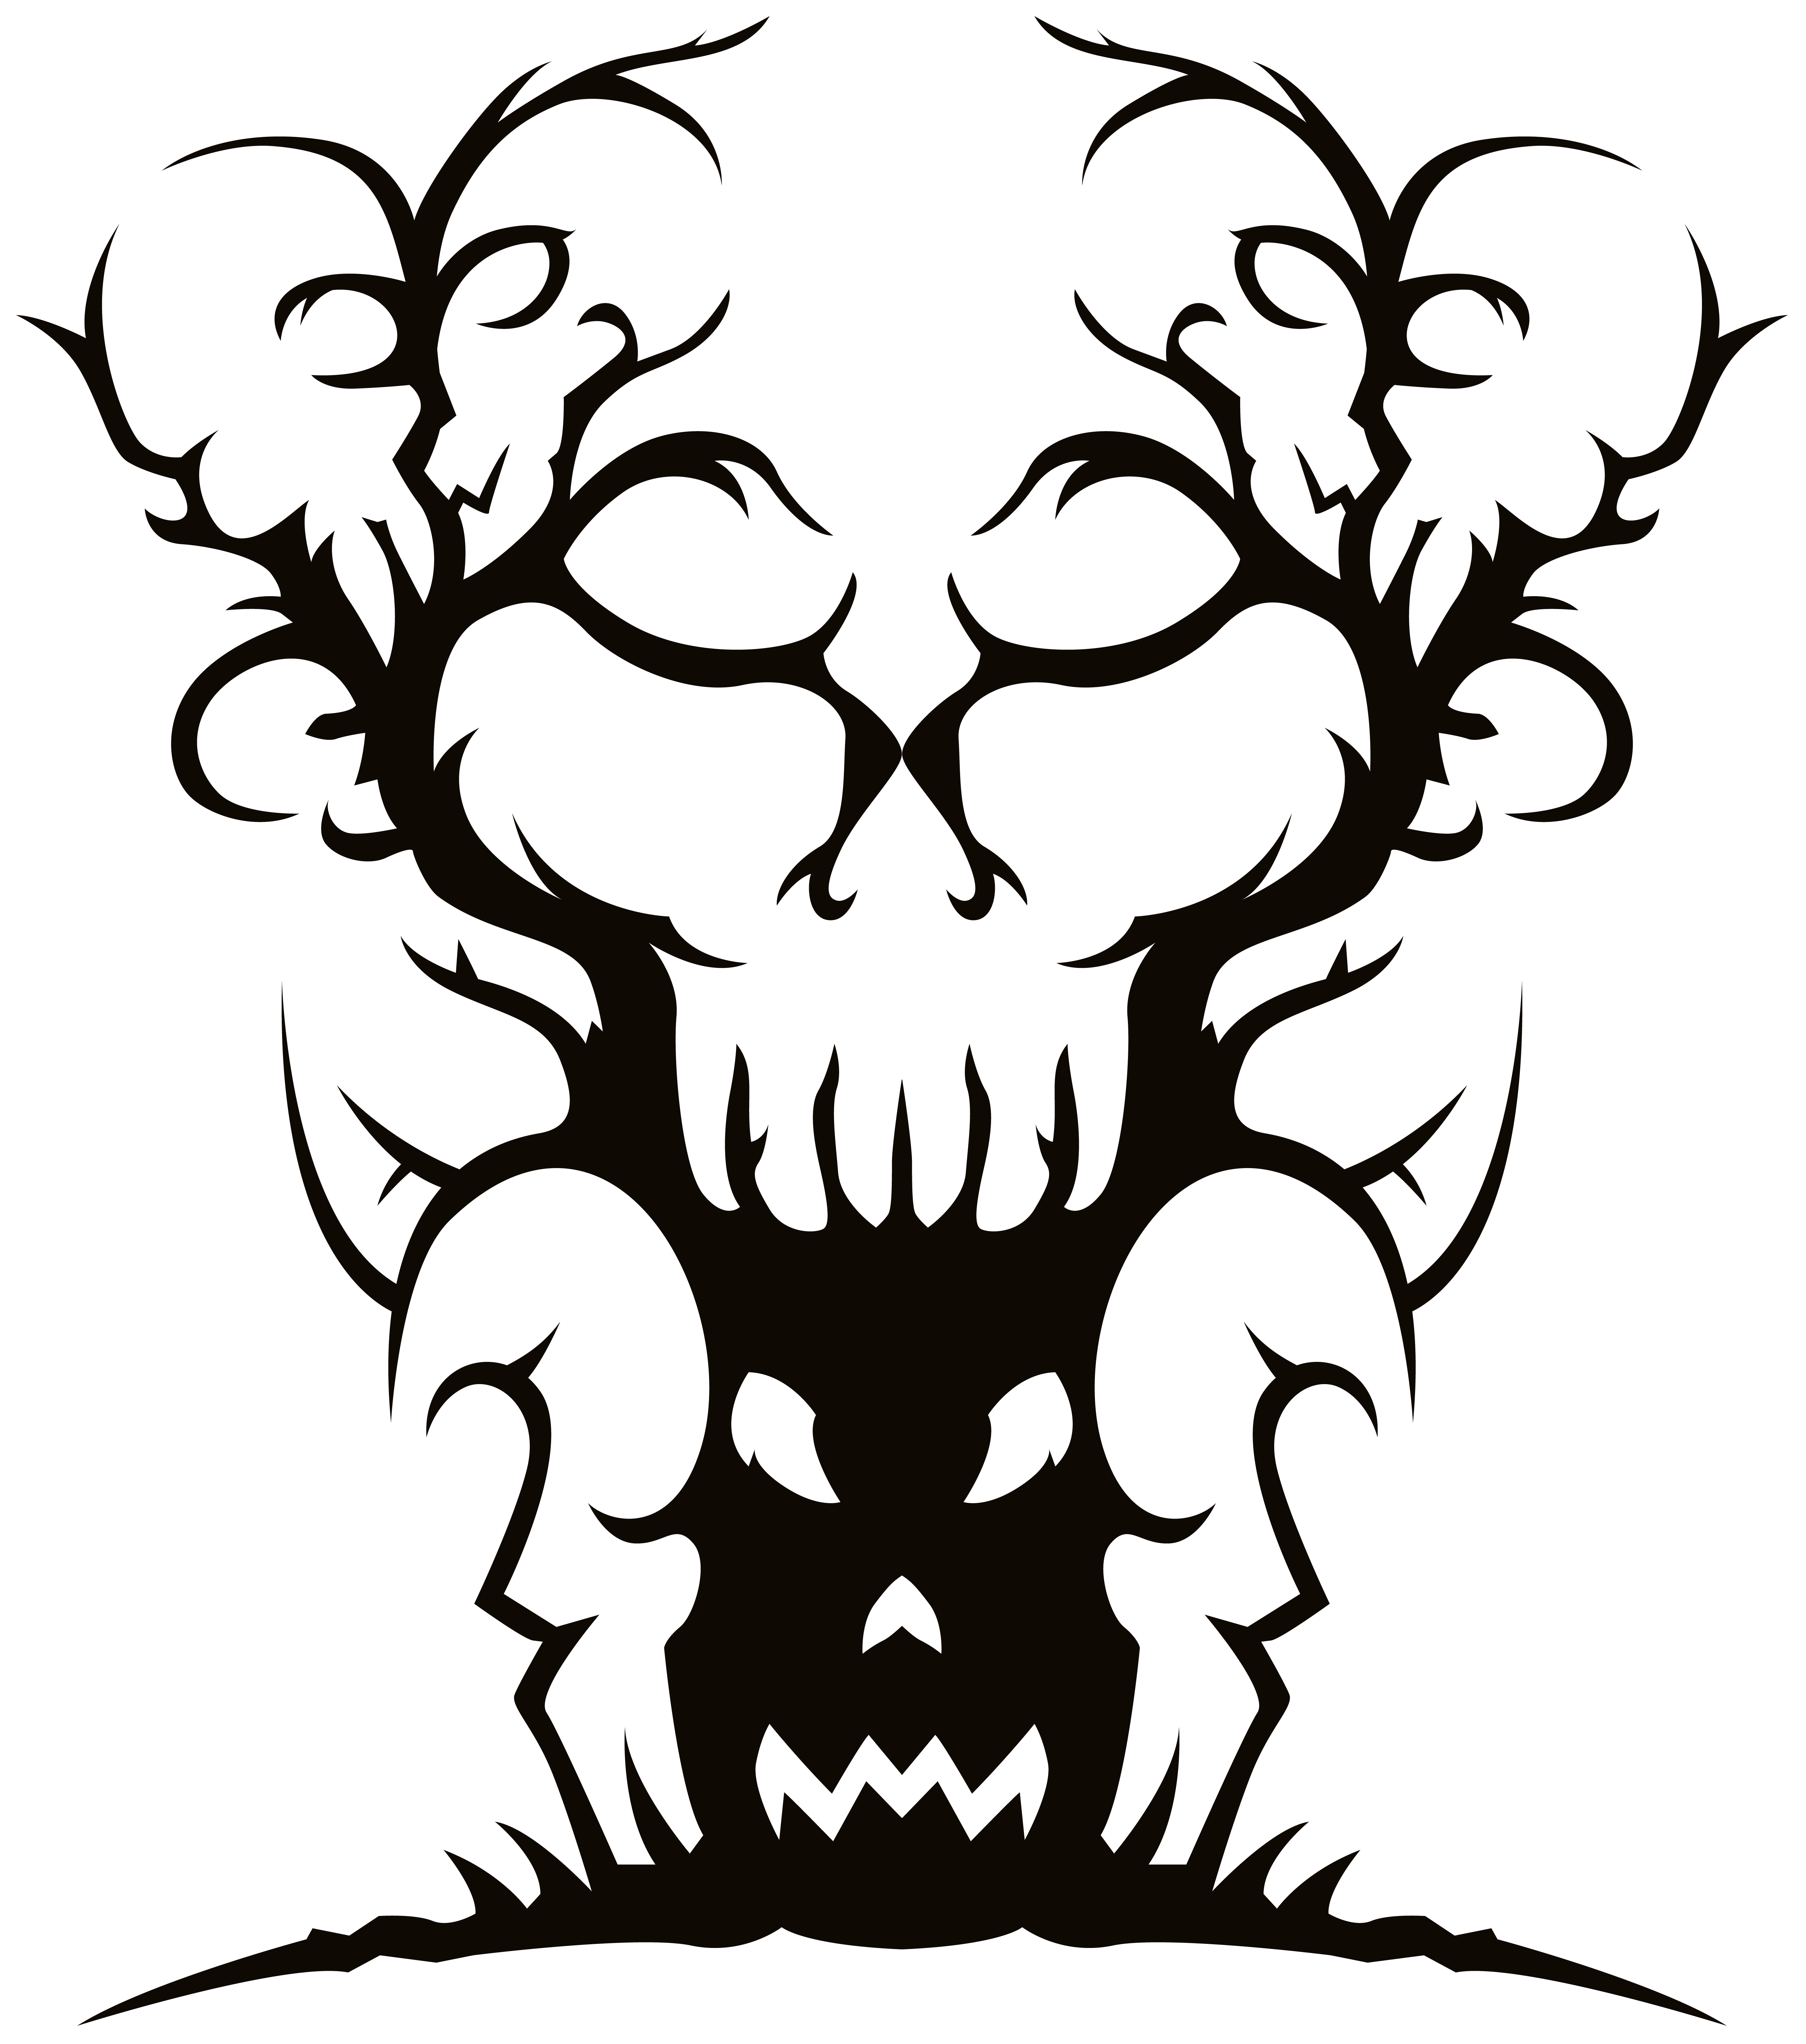 Scary Spooky Tree PNG Clipart Image 